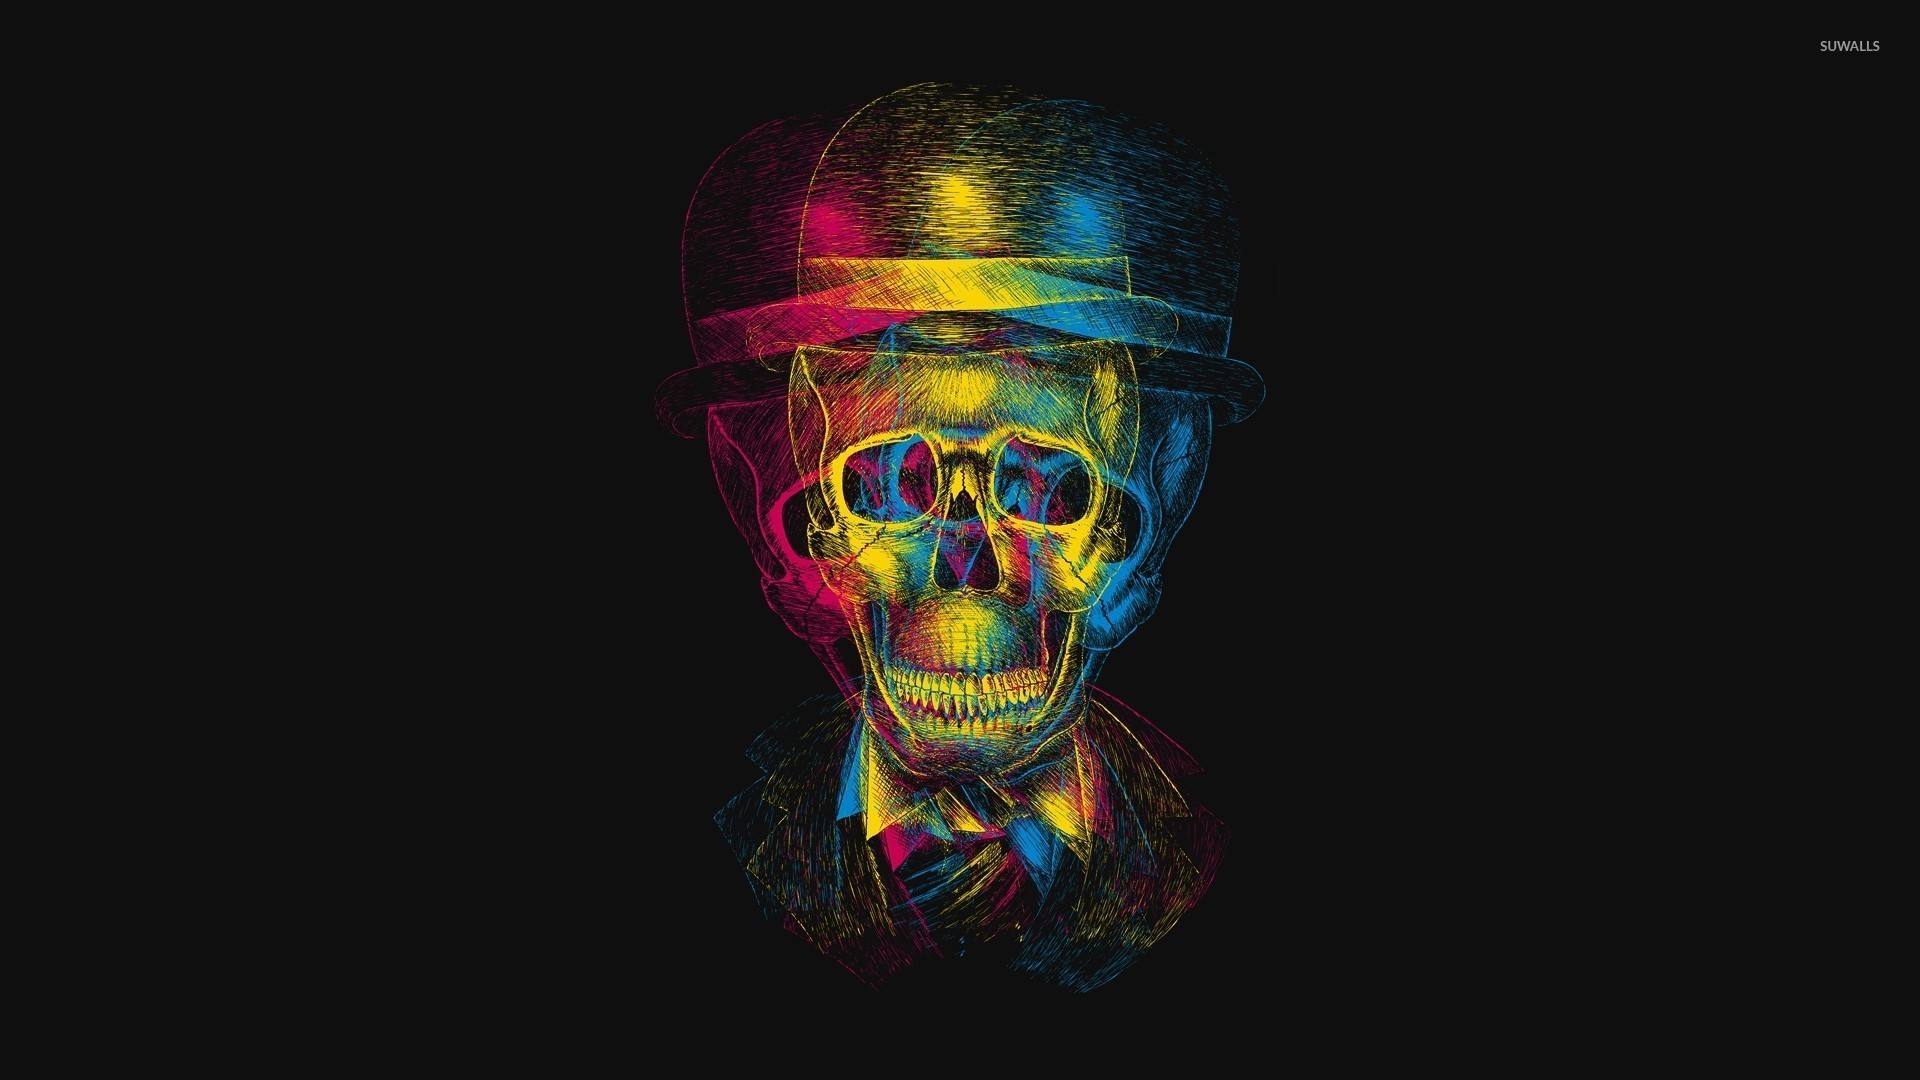 CMYK skull with top hat wallpaper   Artistic wallpapers   24094